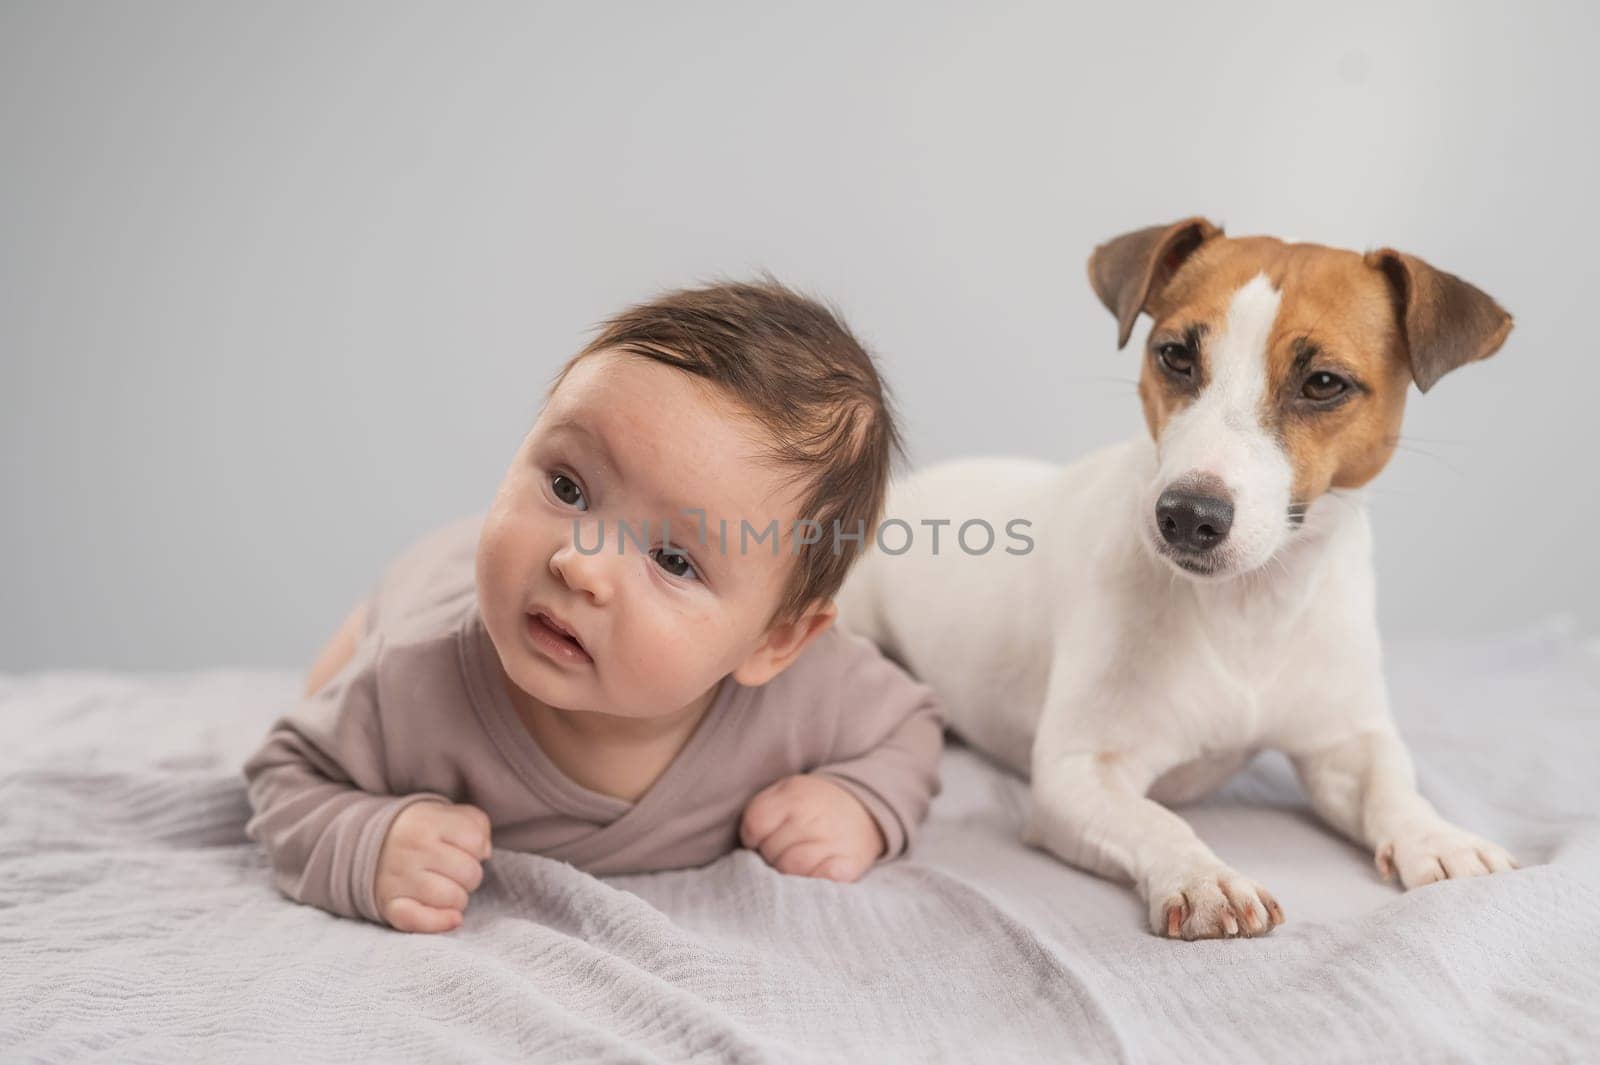 Portrait of a baby lying on his stomach and a Jack Russell Terrier dog